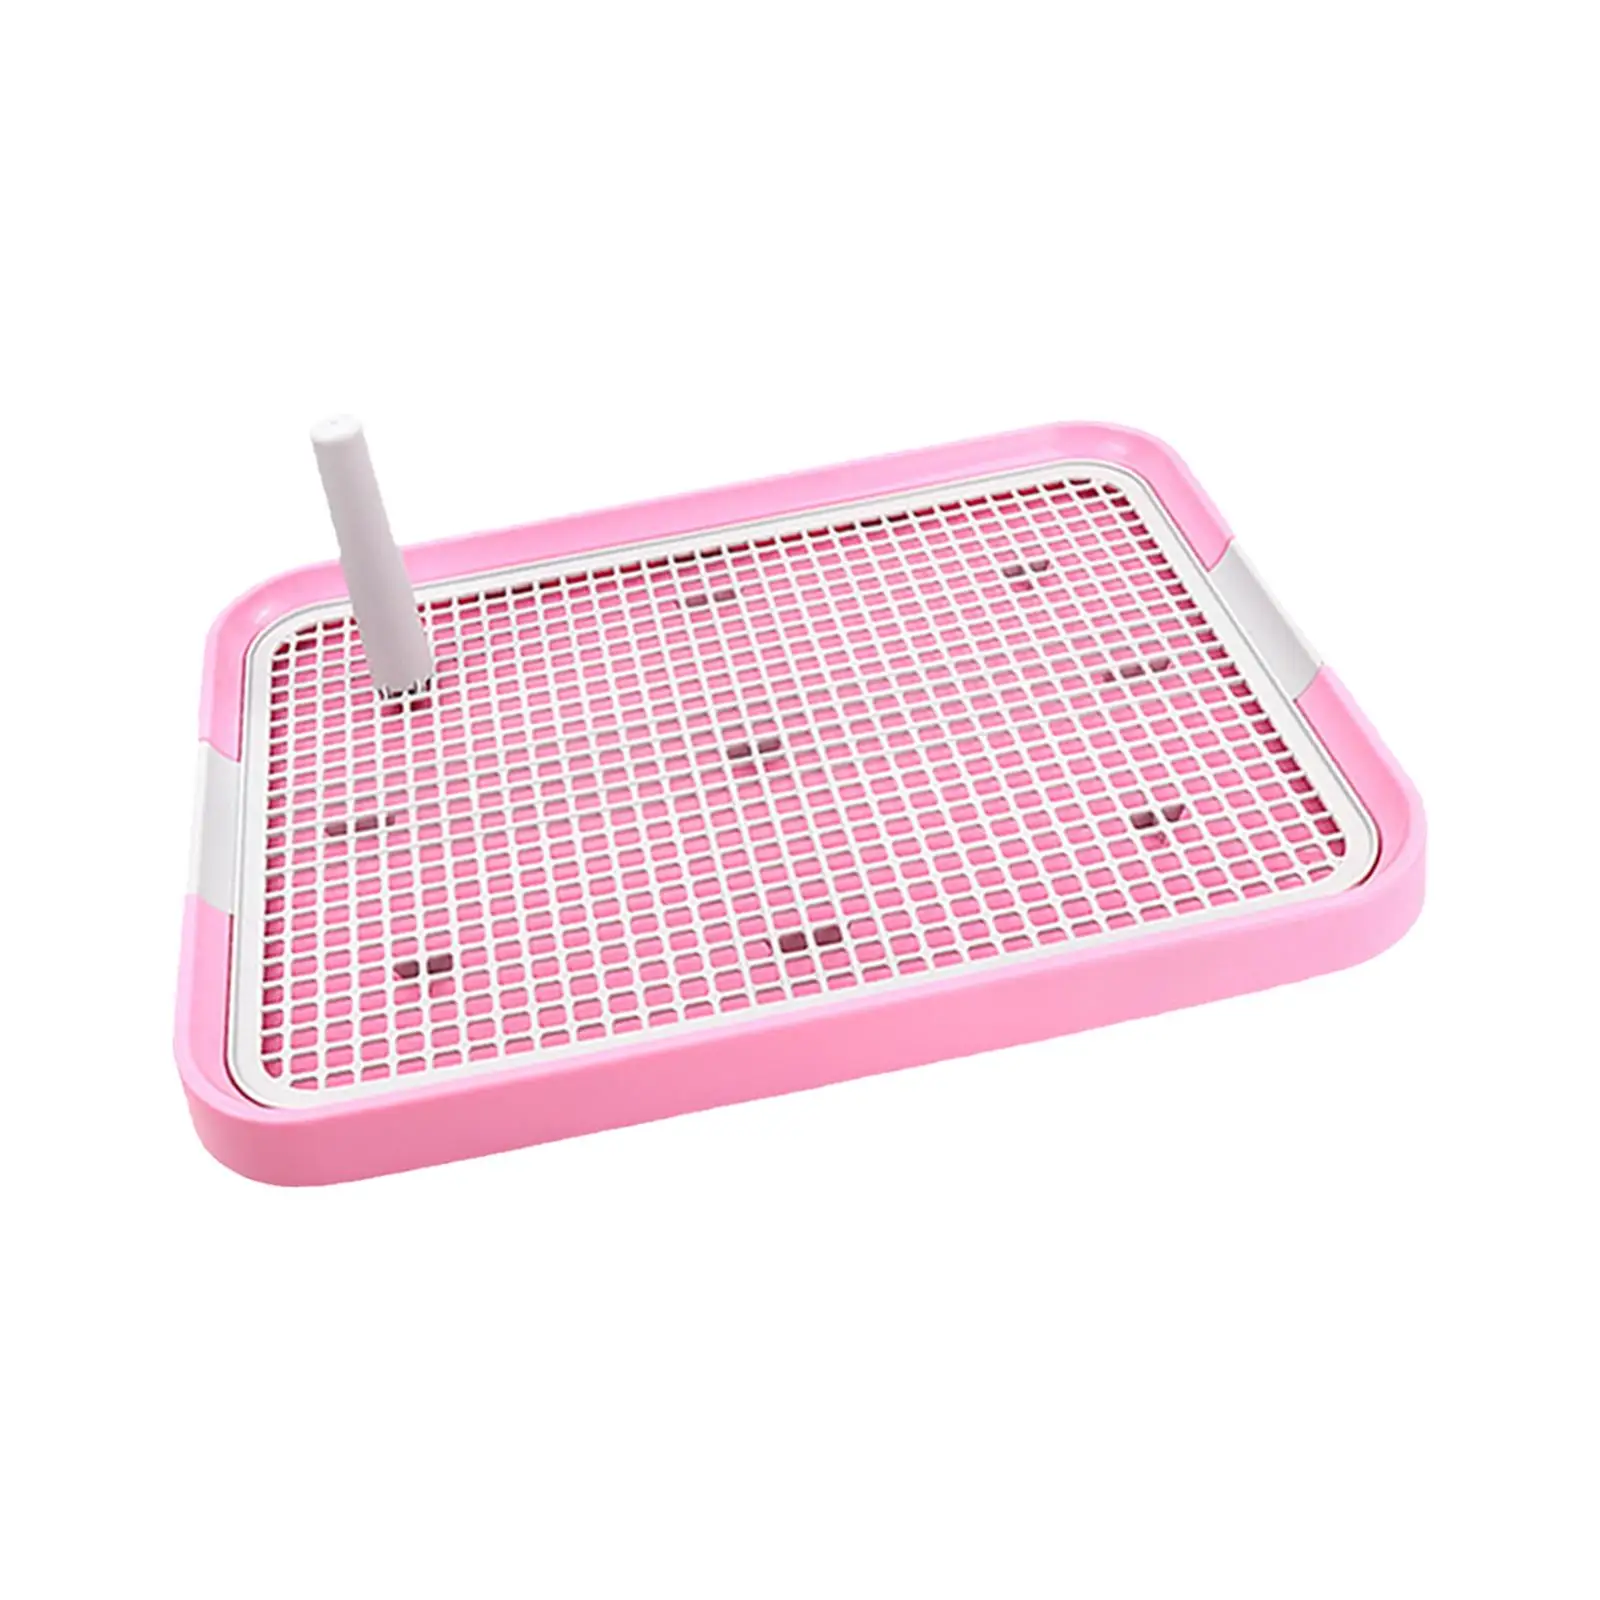 Puppy Dog Potty Tray, Pee Pad Holder, Mesh Training Toilet, Portable Dog Litter Box for Small and Medium Dogs, Bunny, Cats